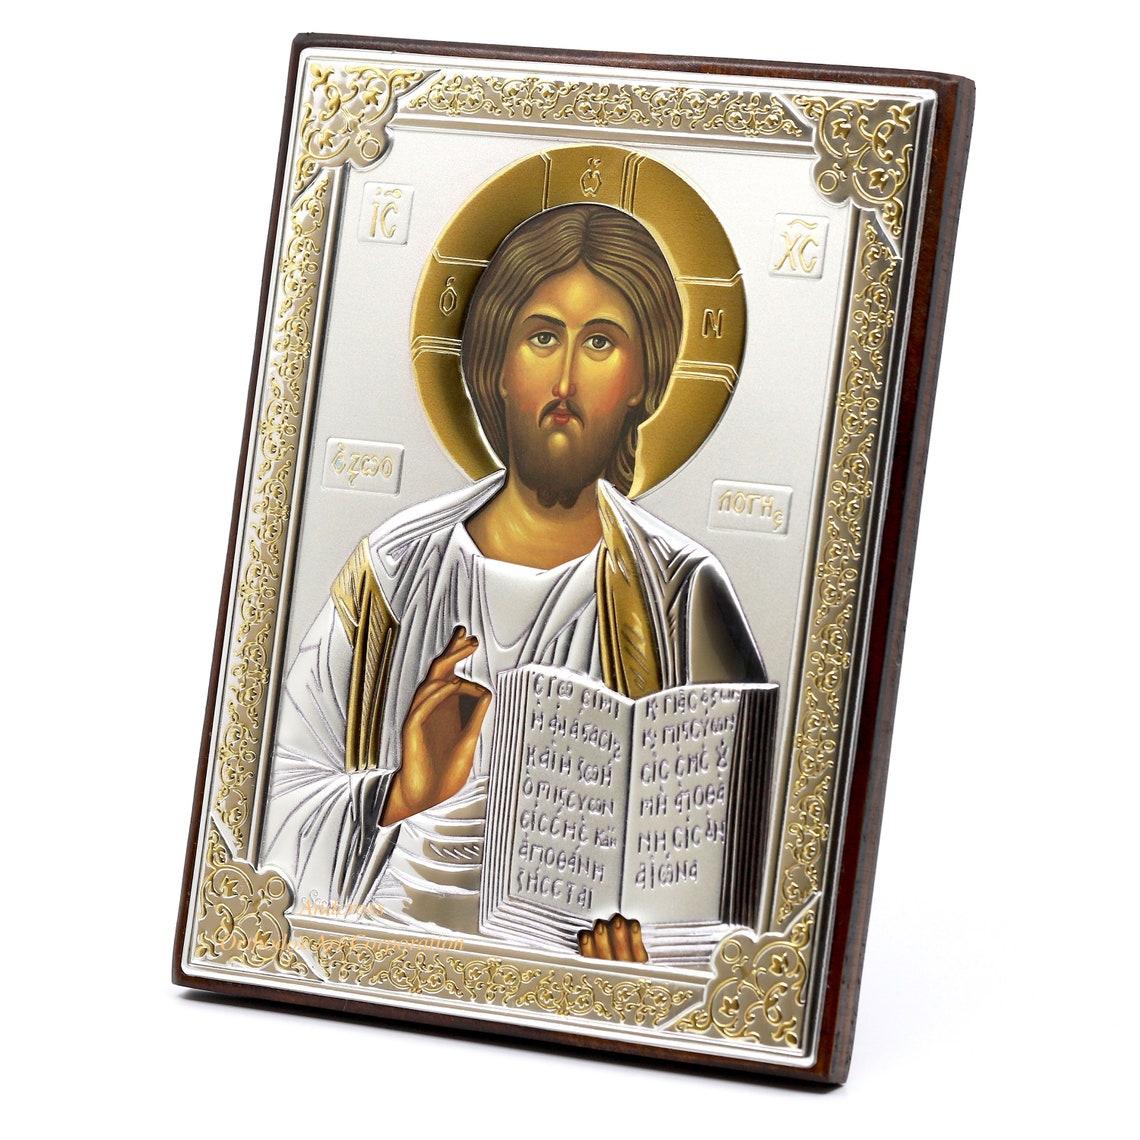 Medium Wooden Russian Orthodox Icon Lord Jesus Christ Pantocrator. Silver Plated .999 Oklad Riza ( 5.12″ X 7.1″ ) 13cm X 18cm. B166|Medium Wooden Russian Orthodox Icon Lord Jesus Christ Pantocrator. Silver Plated .999 Oklad Riza ( 5.12″ X 7.1″ ) 13cm X 18cm. B166|Medium Wooden Russian Orthodox Icon Mother Of God Seven Arrows. Silver Plated .999 Oklad Riza ( 5.12″ X 7.1″ ) 13cm X 18cm. B164|Medium Wooden Russian Orthodox Icon Mother Of God Seven Arrows. Silver Plated .999 Oklad Riza ( 5.12″ X 7.1″ ) 13cm X 18cm. B164|Medium Wooden Russian Orthodox Icon Mother Of God Seven Arrows. Silver Plated .999 Oklad Riza ( 5.12″ X 7.1″ ) 13cm X 18cm. B164|Medium Wooden Russian Orthodox Icon Mother Of God Seven Arrows. Silver Plated .999 Oklad Riza ( 5.12″ X 7.1″ ) 13cm X 18cm. B164